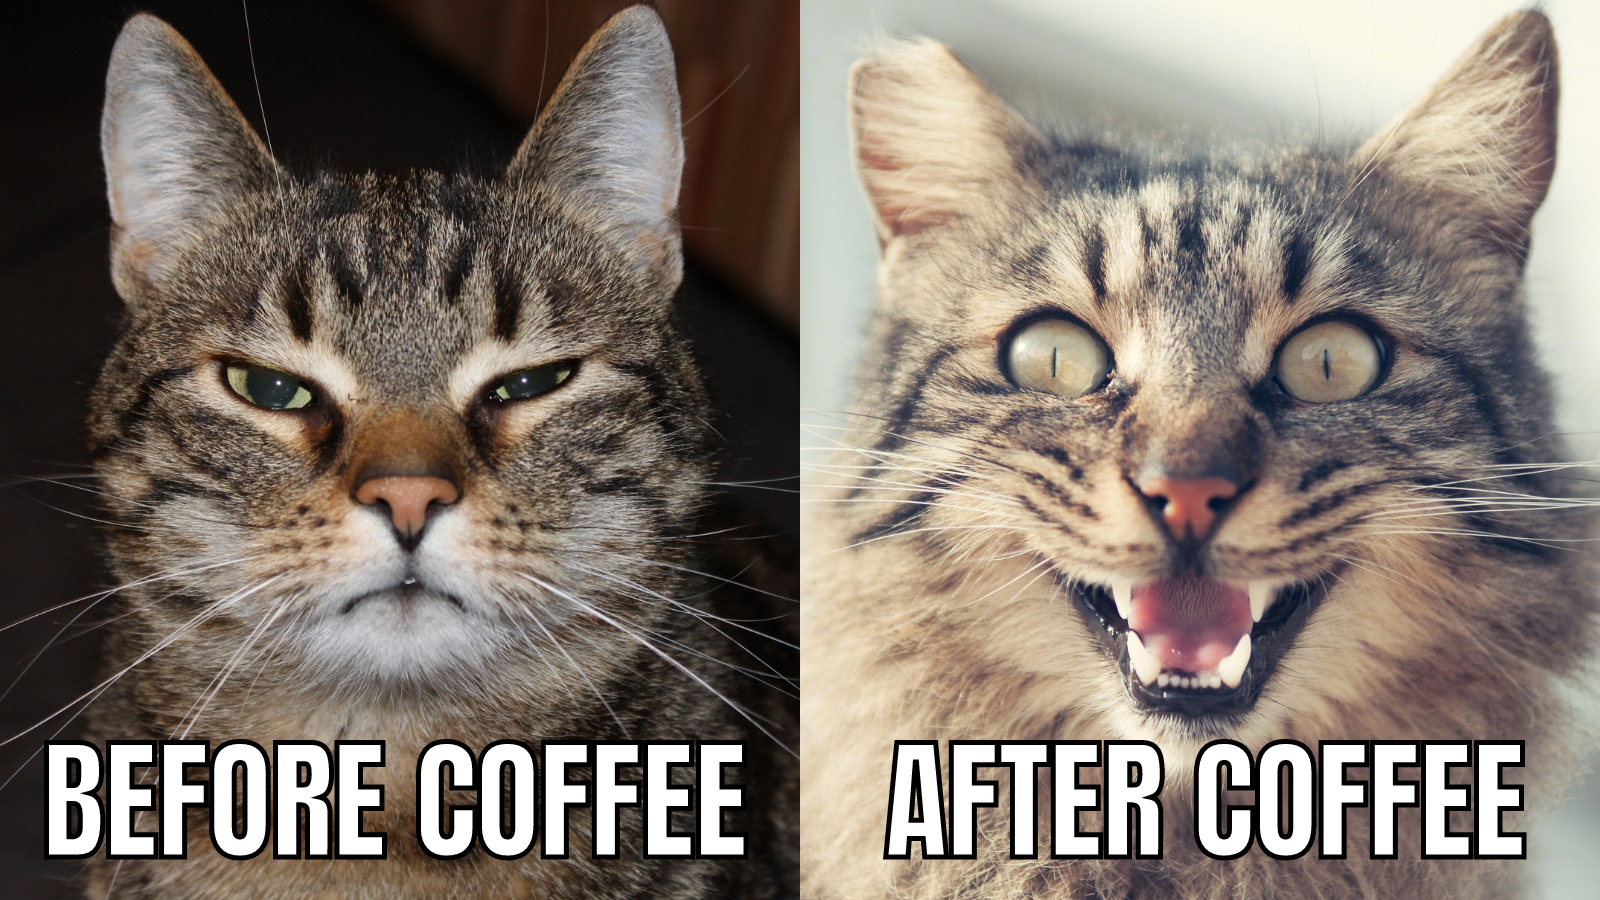 Certain Effects of Coffee